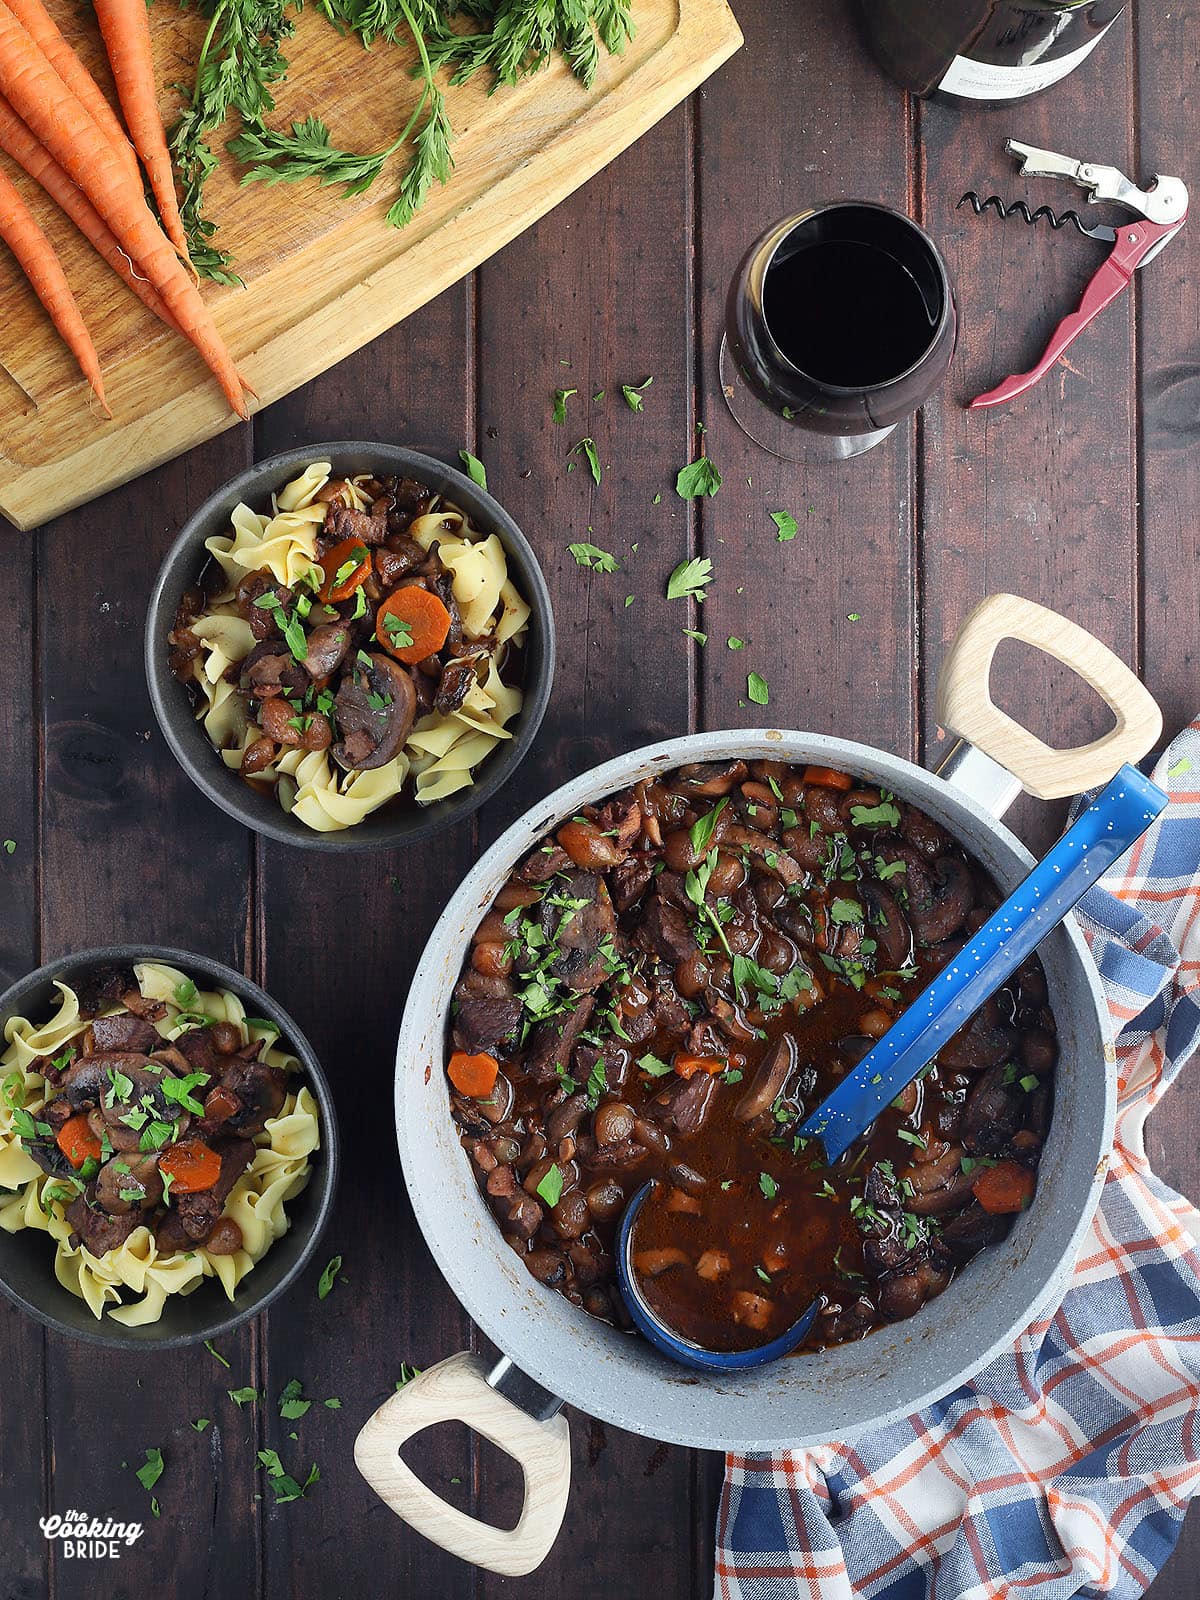 dutch oven full of venison bourguignon with a blue soup ladle, two bowls of venison bourguignon over egg noodles and a glass of red wine to the side